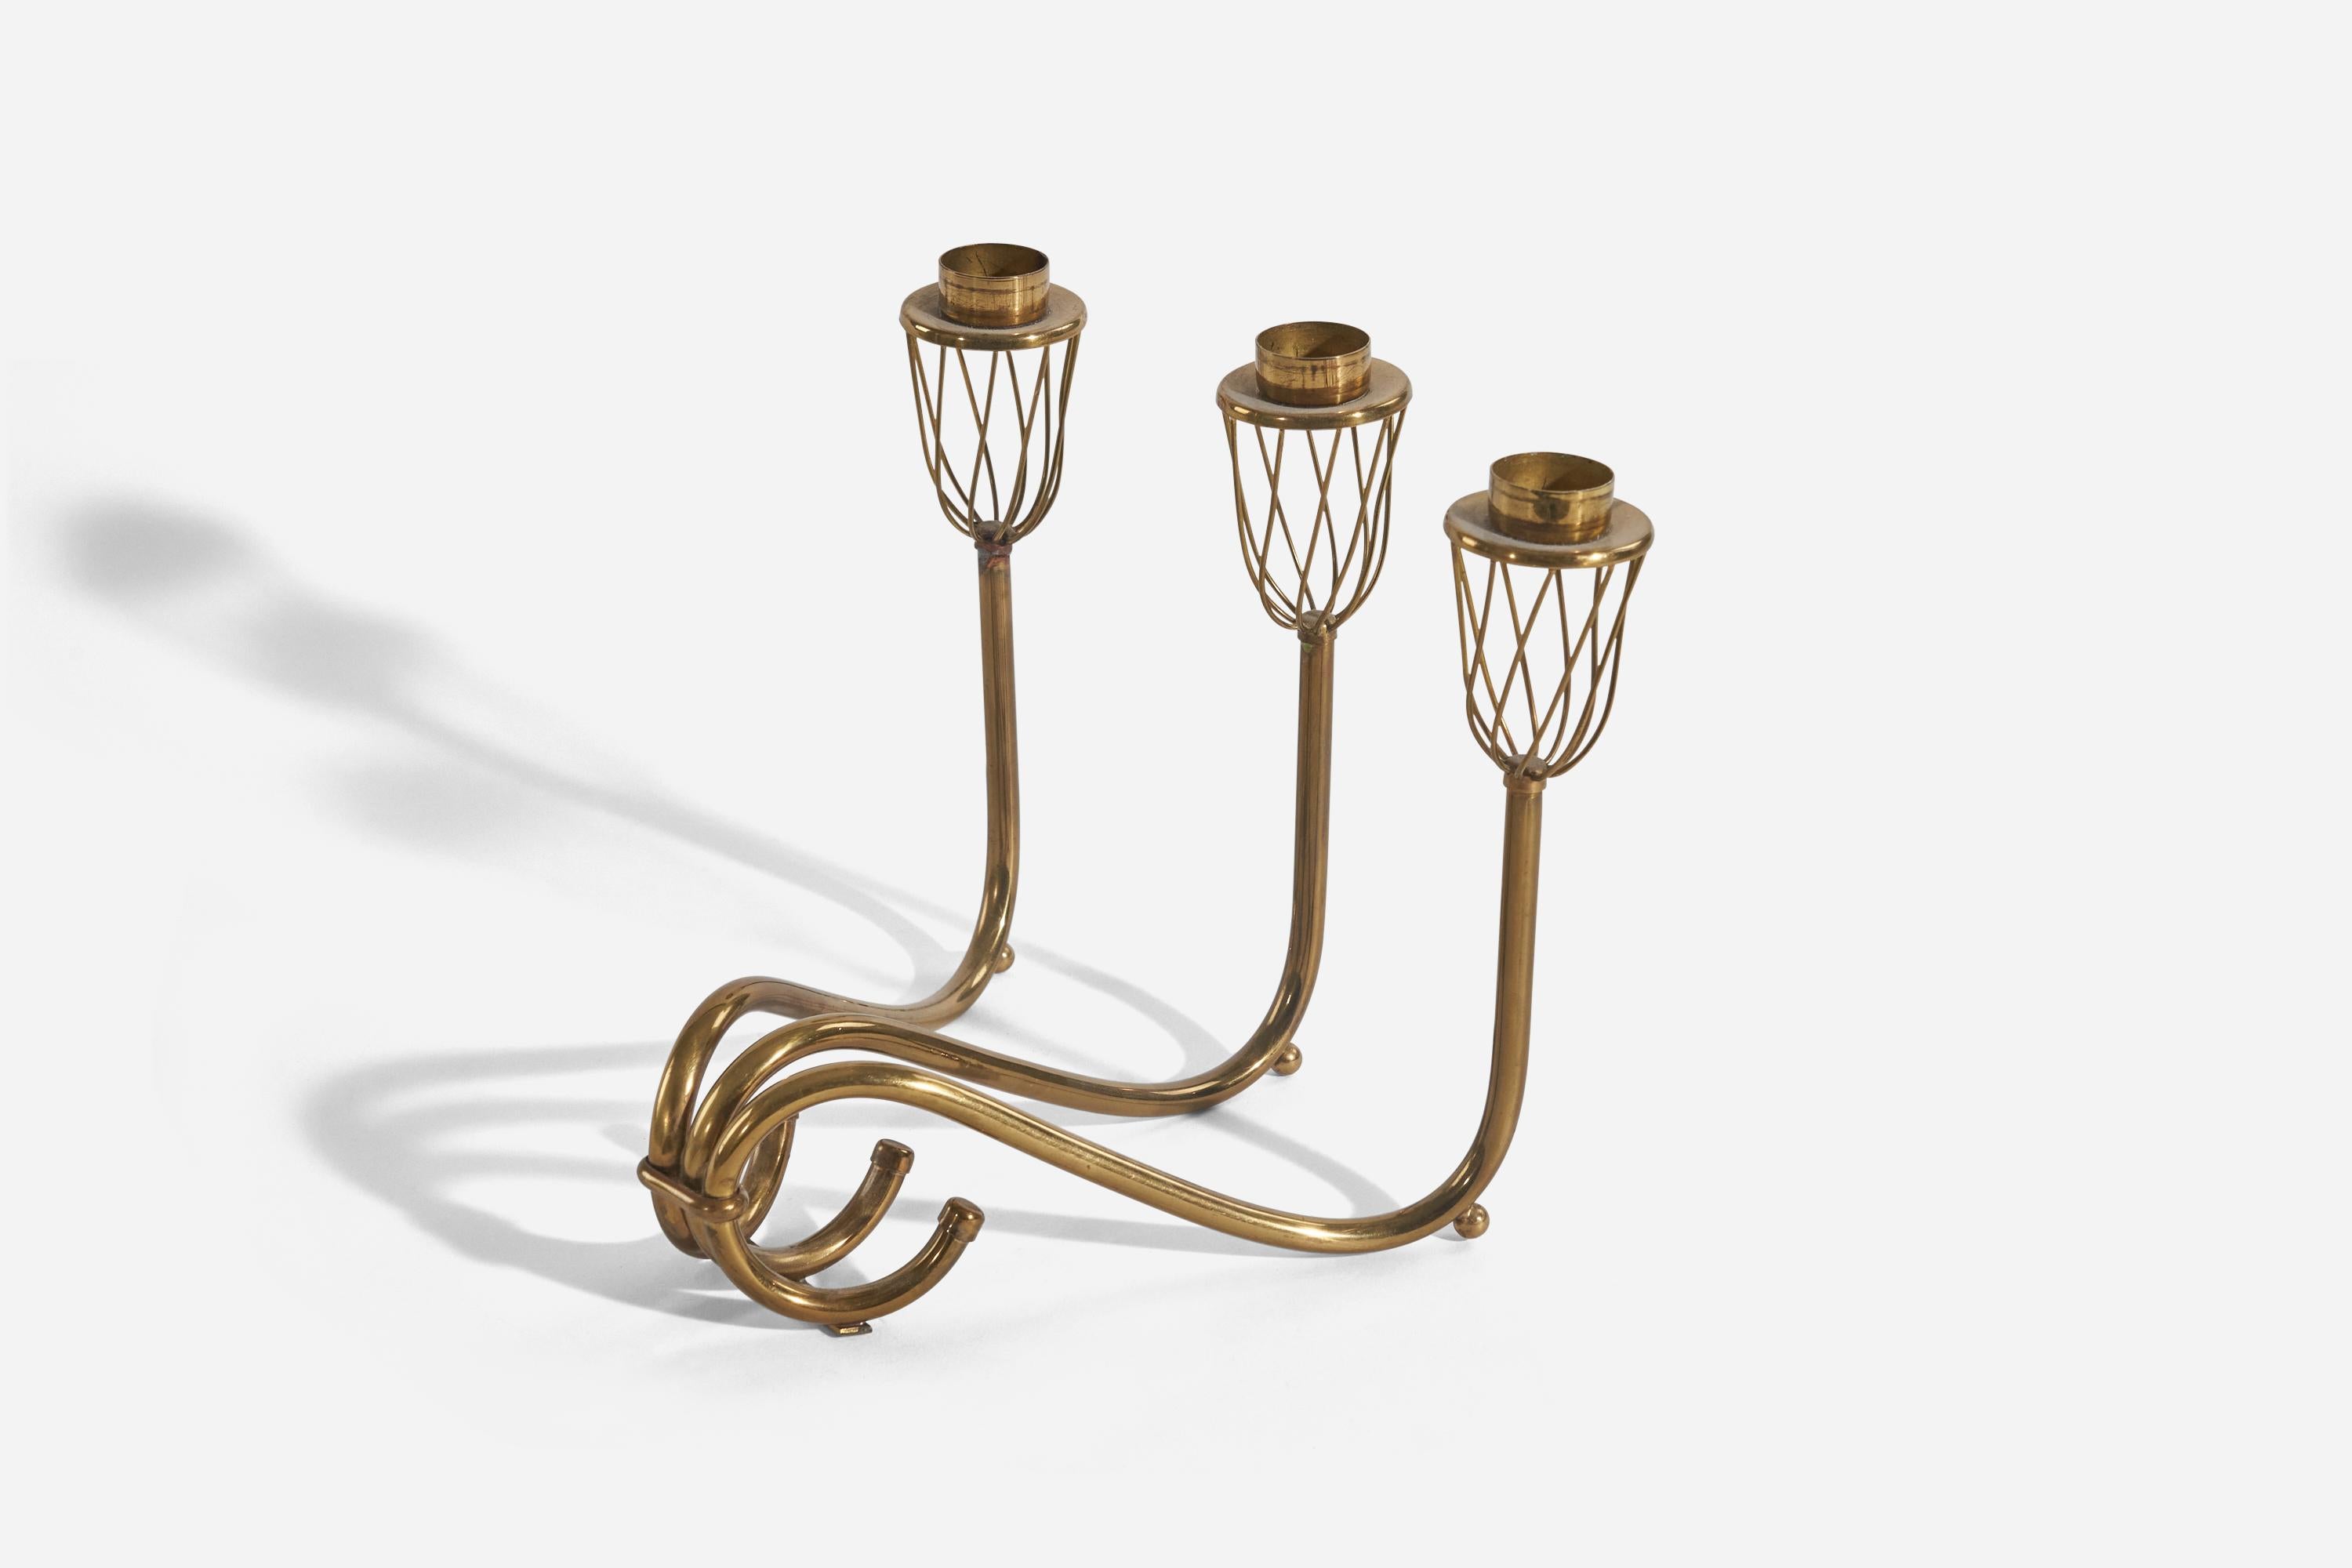 A brass, 3-armed candelabra designed and produced in Sweden, 1940s.

